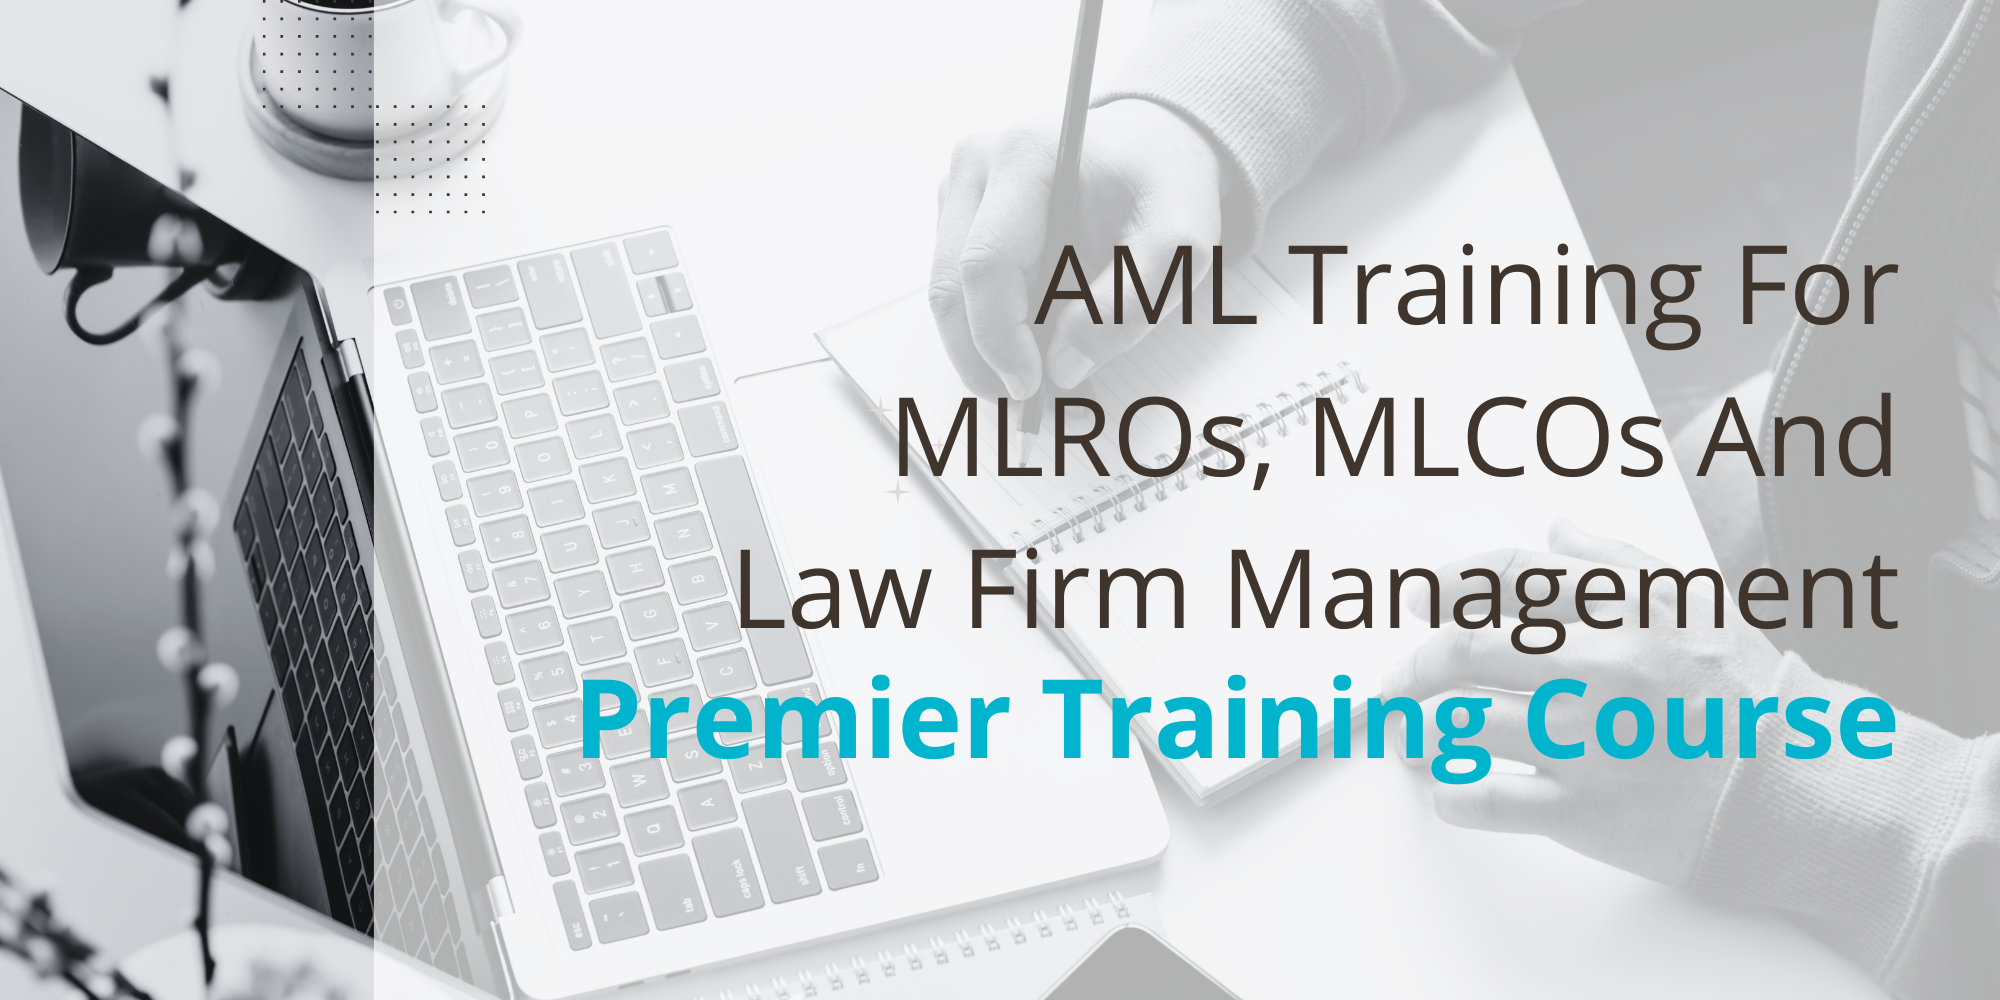 Anti-Money Laundering (AML) Training For MLROs, MLCOs And Law Firm Management Course